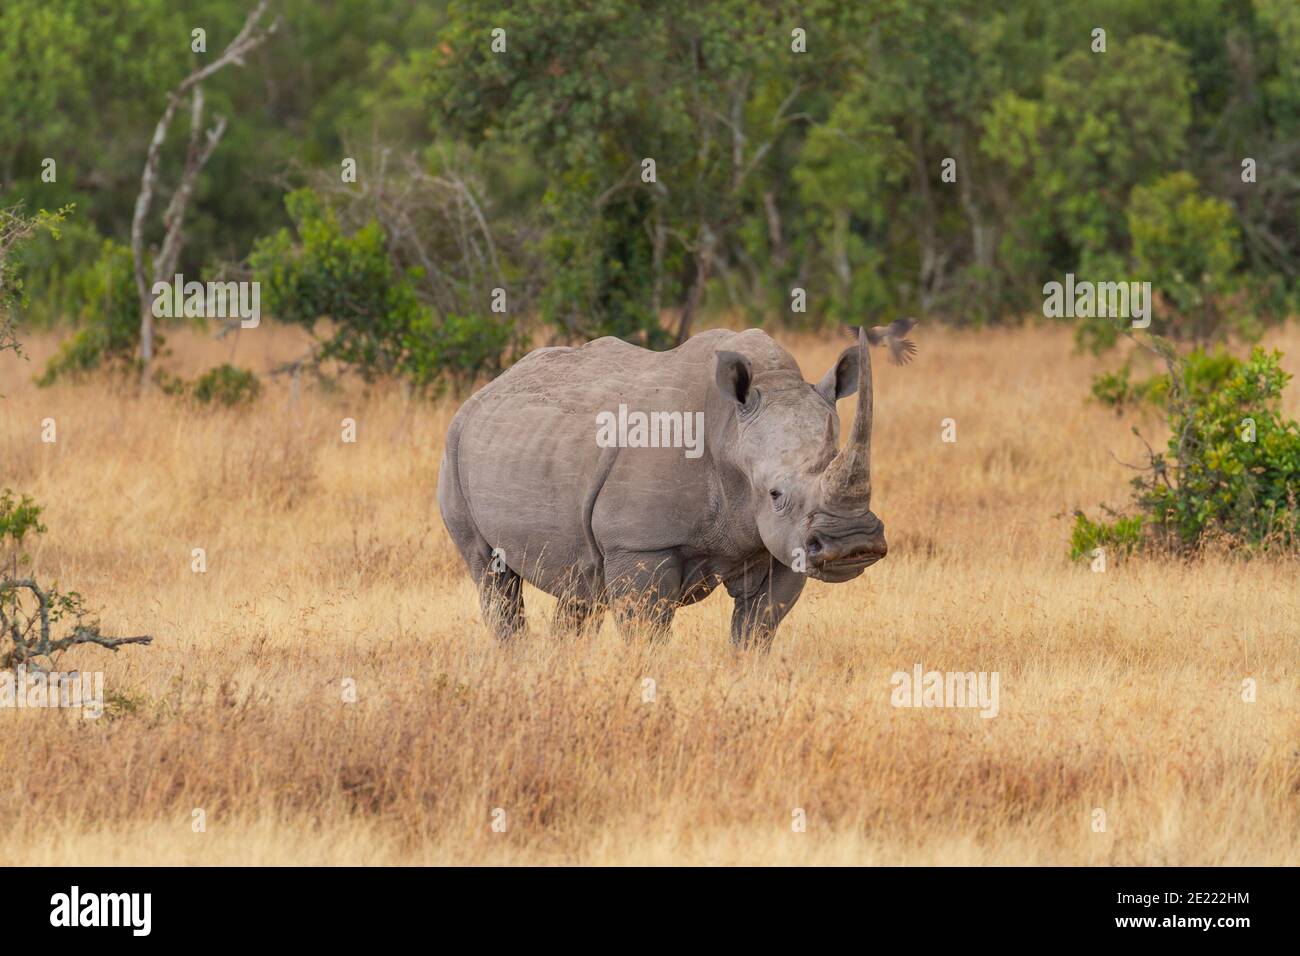 Southern white rhinoceros (Ceratotherium sinum simum) with long horns in Ol Pejeta Conservancy, Kenya, Africa. Square-lipped front near threatened Stock Photo